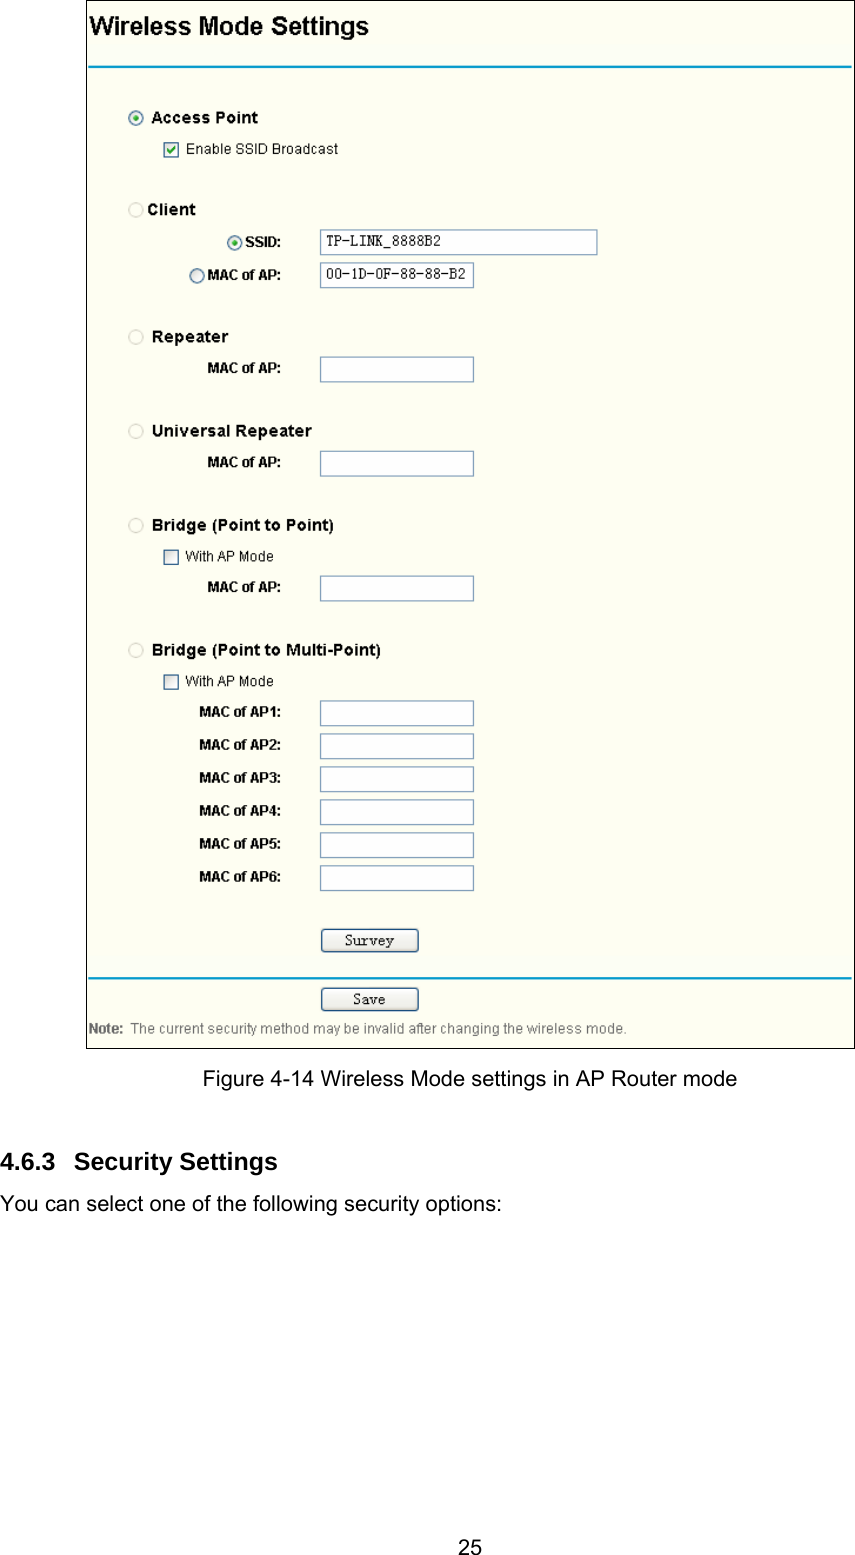  25  Figure 4-14 Wireless Mode settings in AP Router mode  4.6.3  Security Settings You can select one of the following security options: 